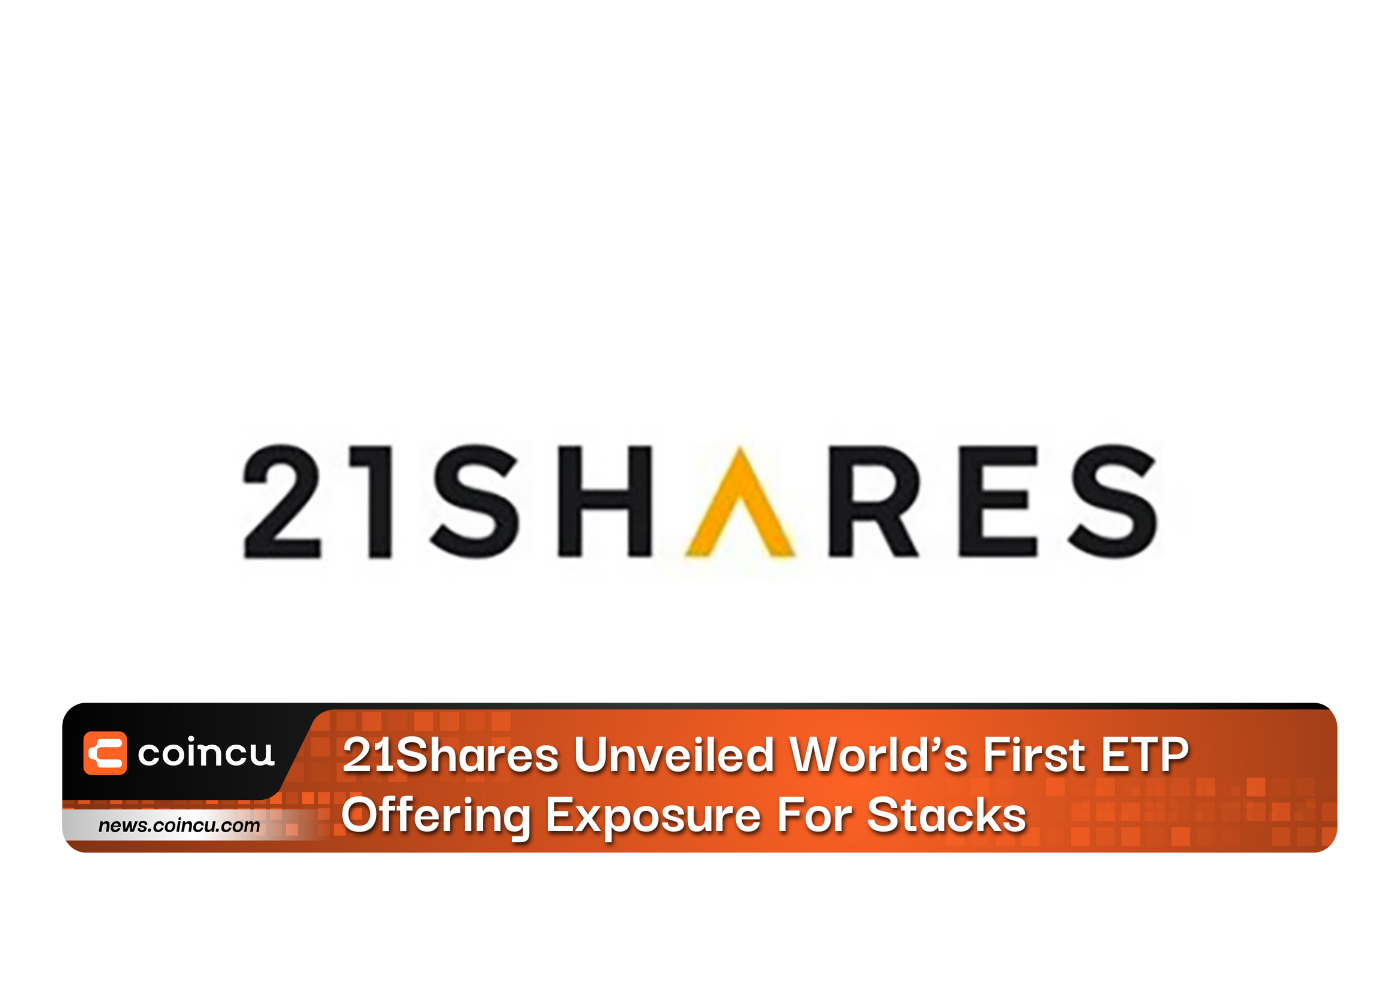 21Shares Unveiled World’s First ETP Offering Exposure For Stacks